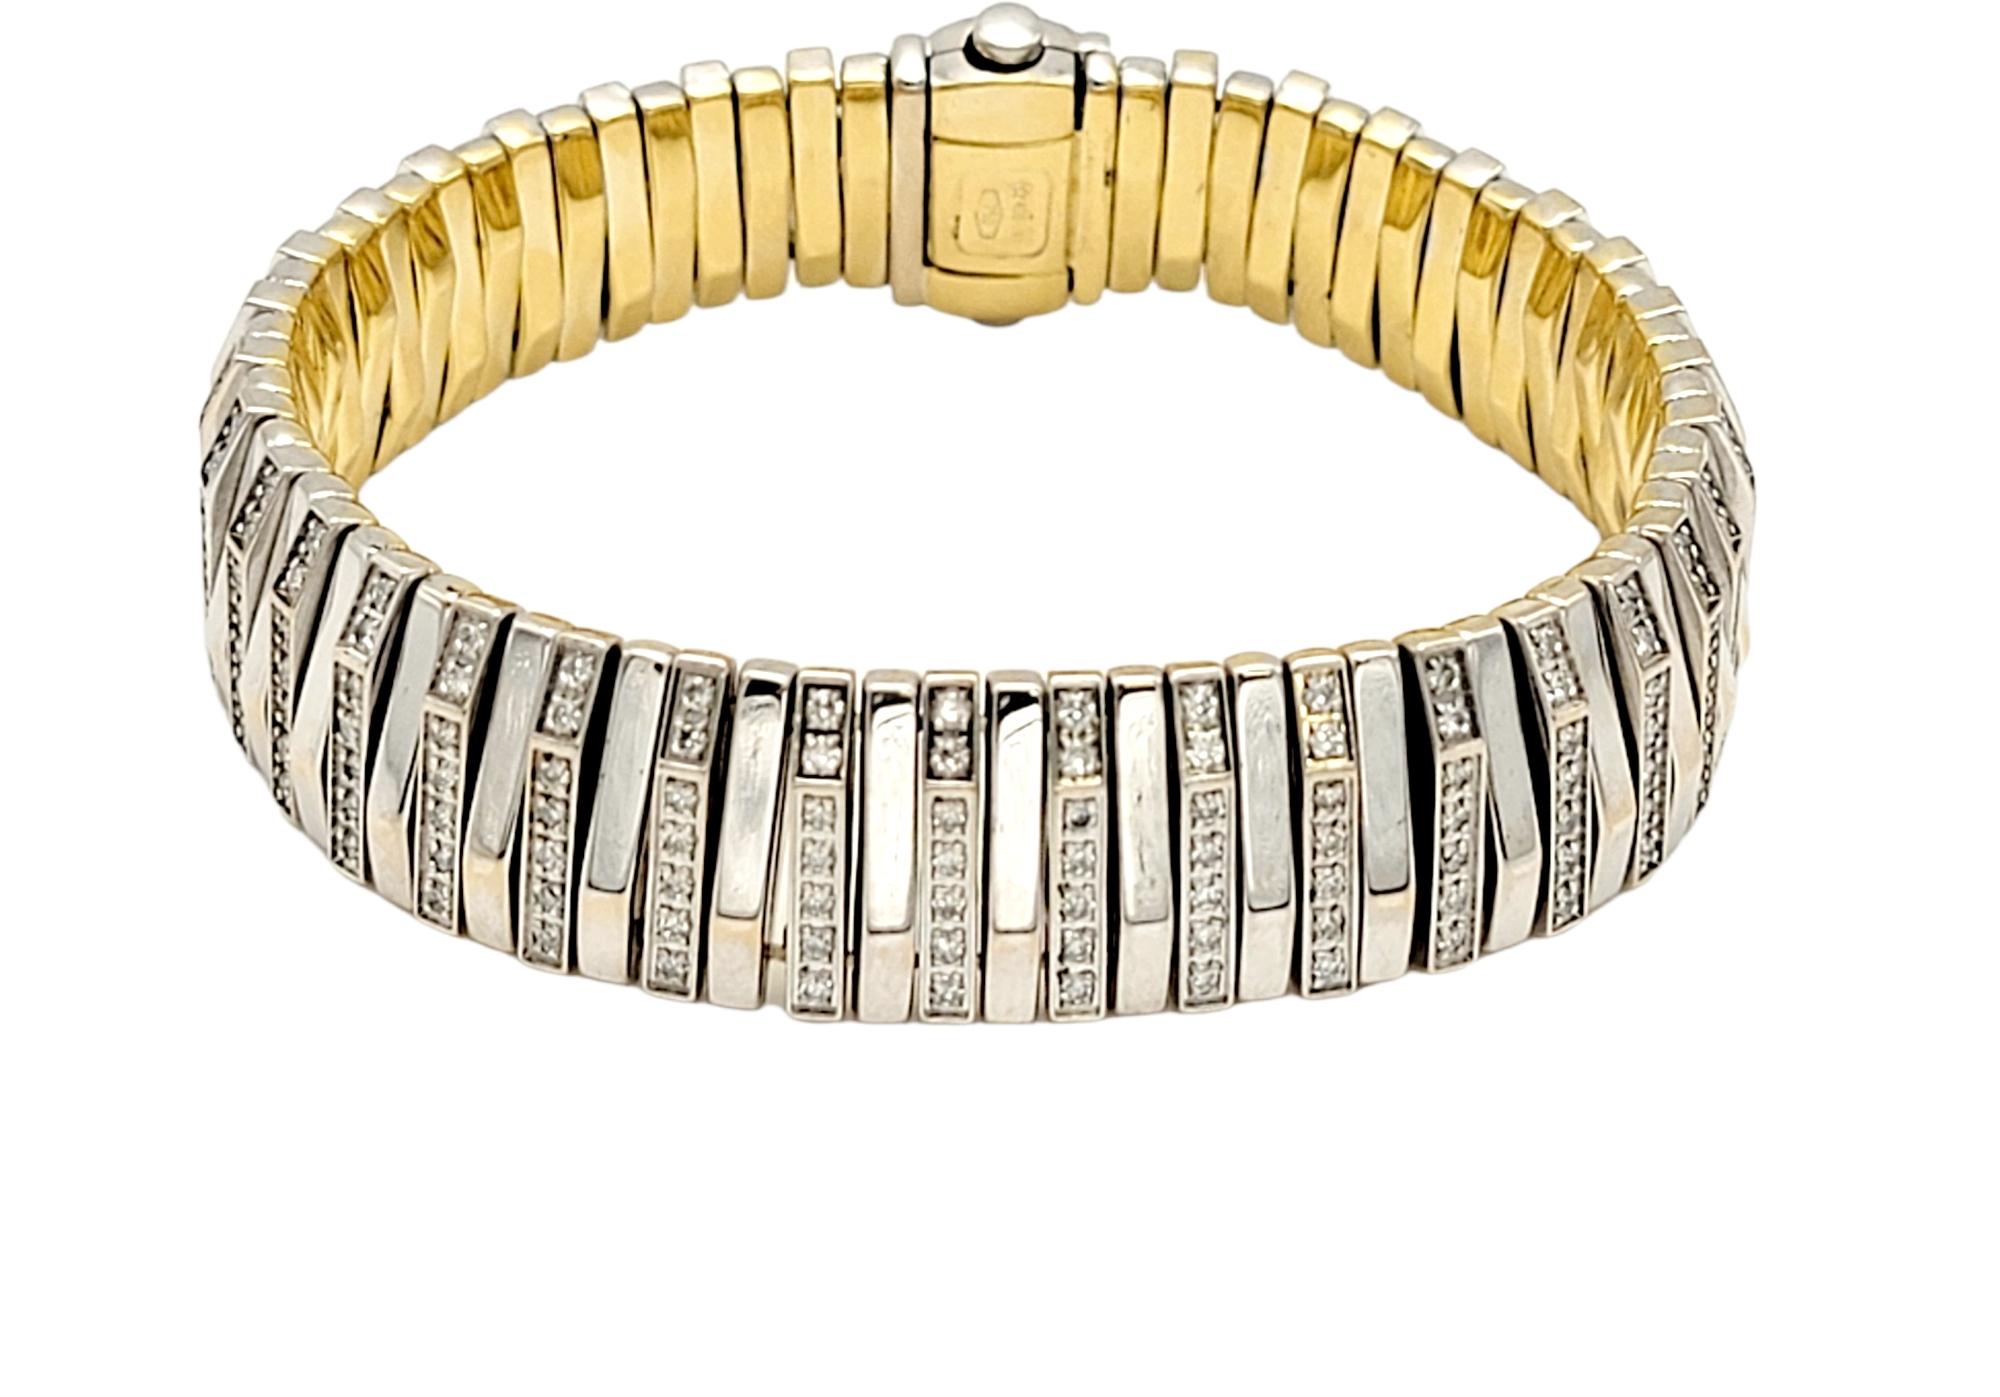 You will absolutely love this strikingly beautiful bracelet by Chimento. It is stunningly simple in design, with curved lines and glittering pave diamonds, making the piece absolutely glow! This lovely bracelet features a series of solid 18 karat